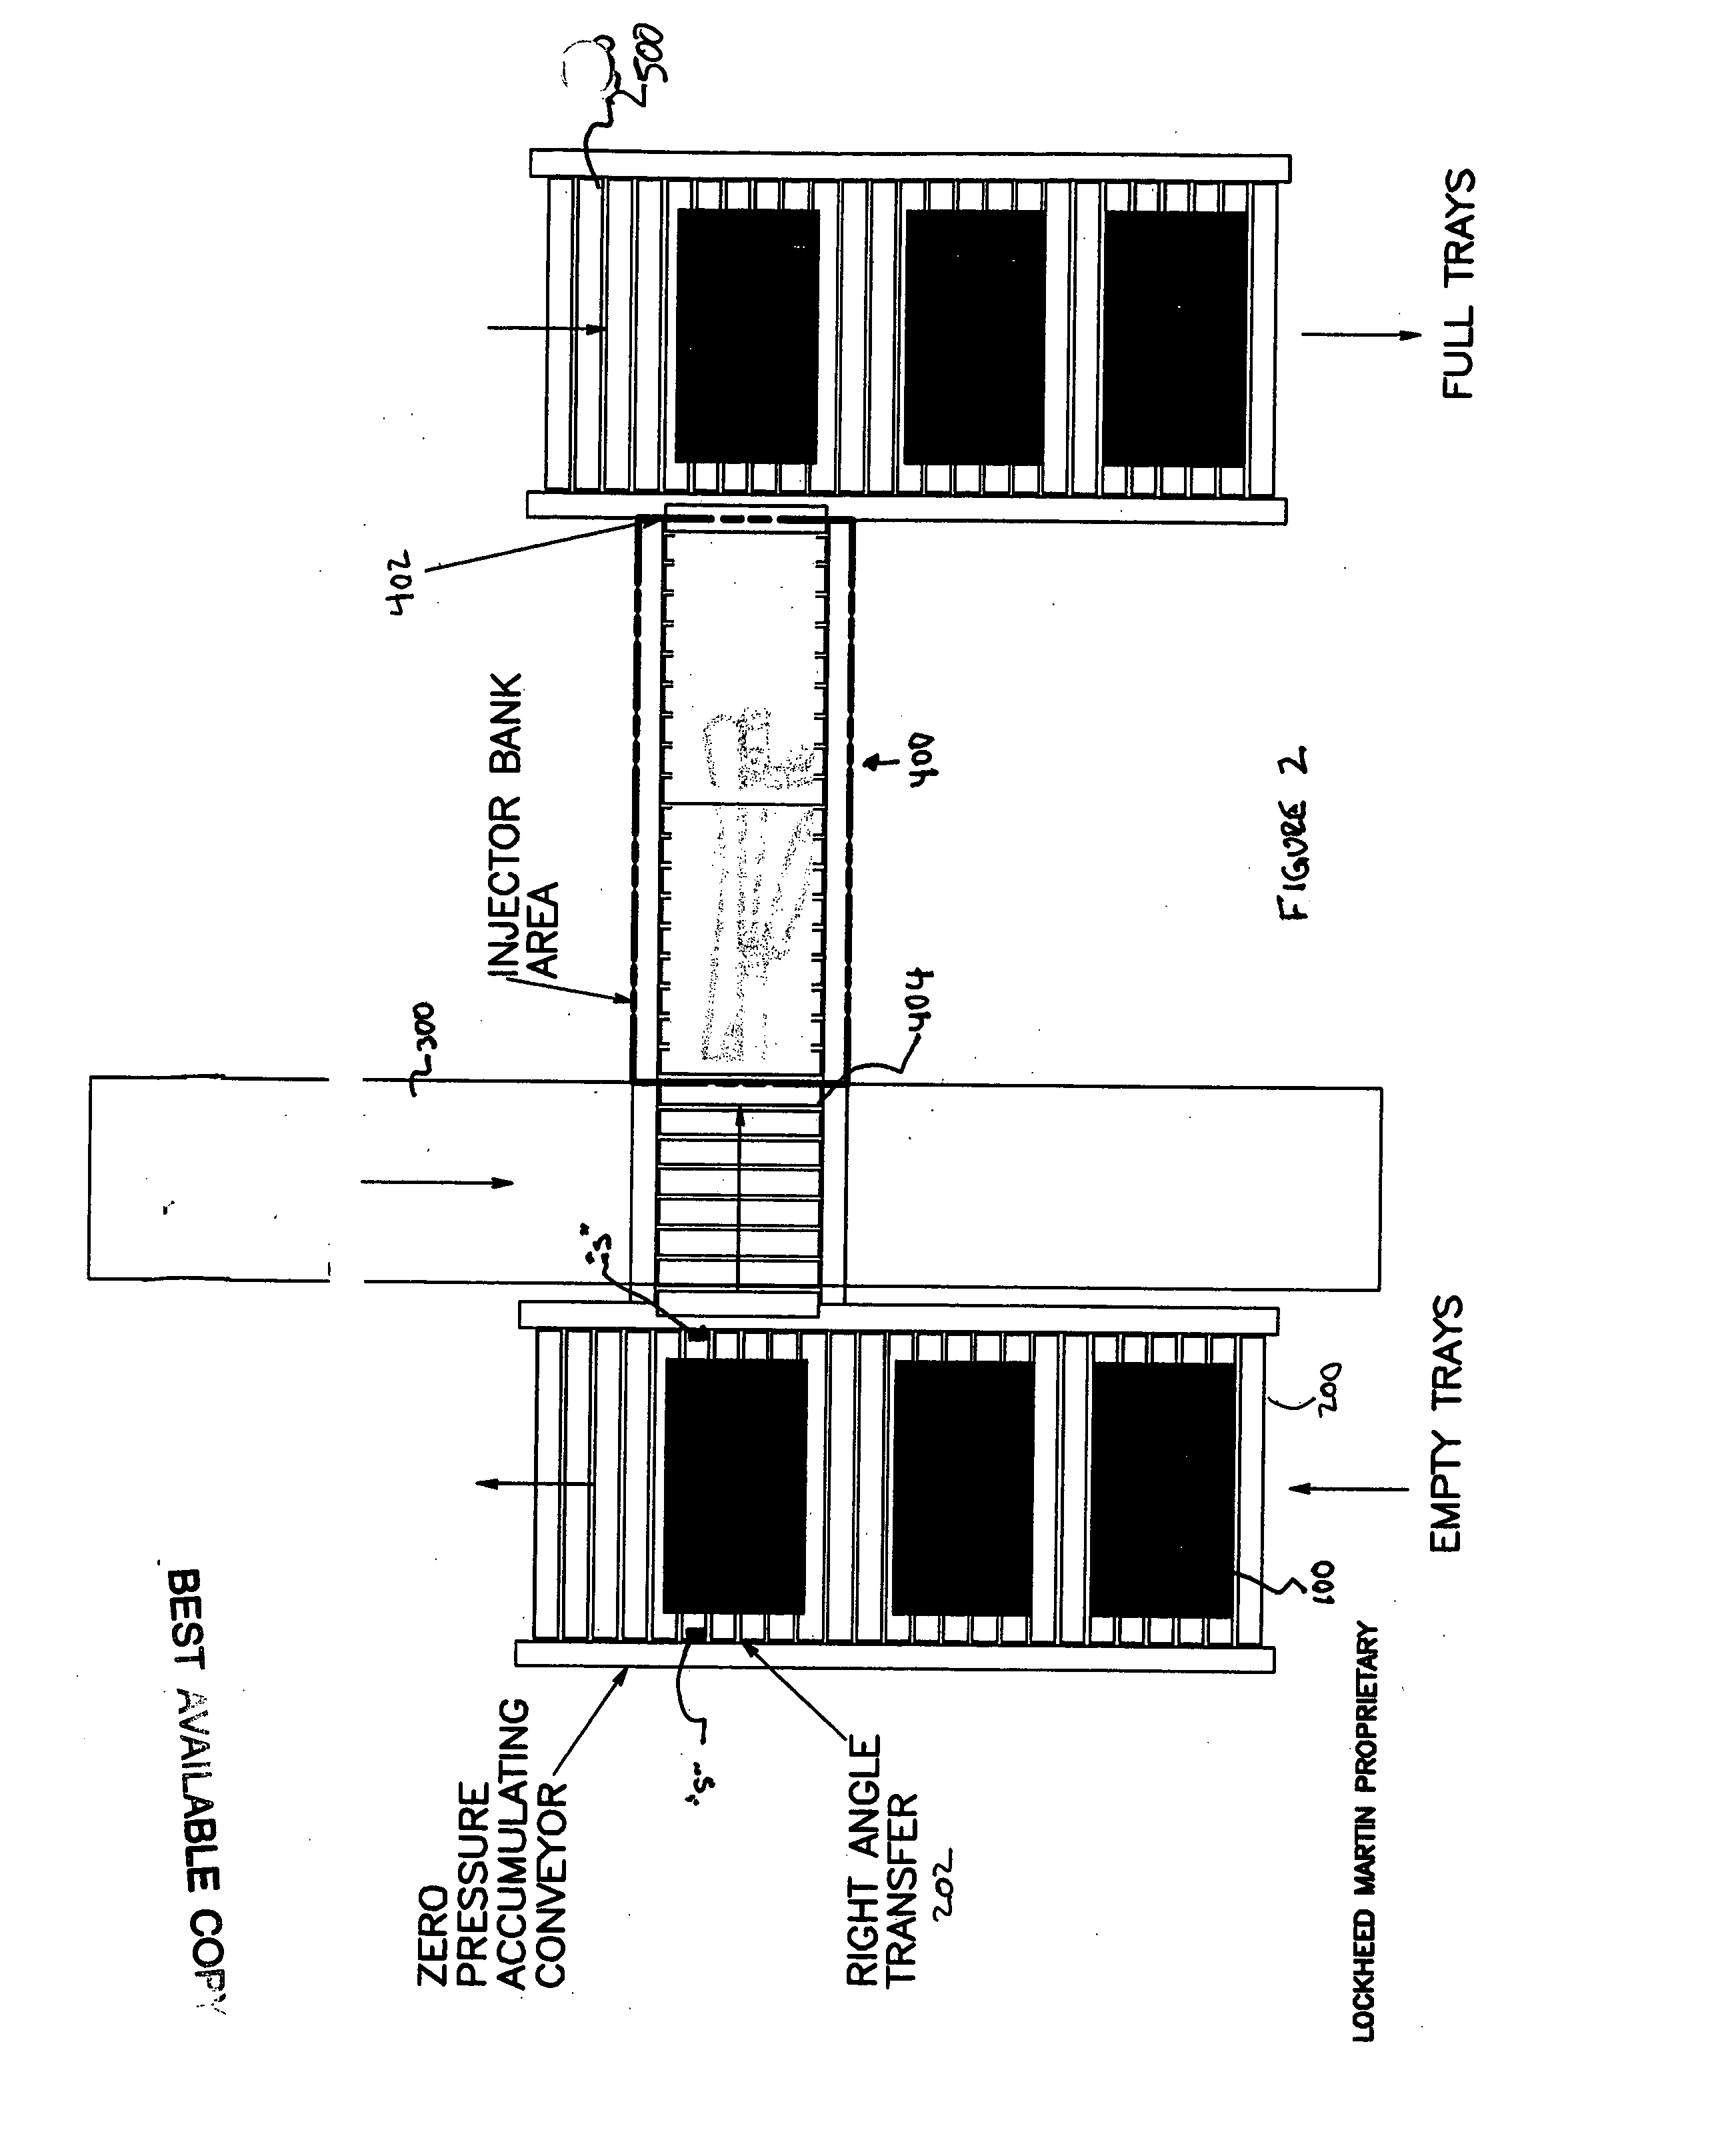 Vertical flat stacking apparatus and method of use